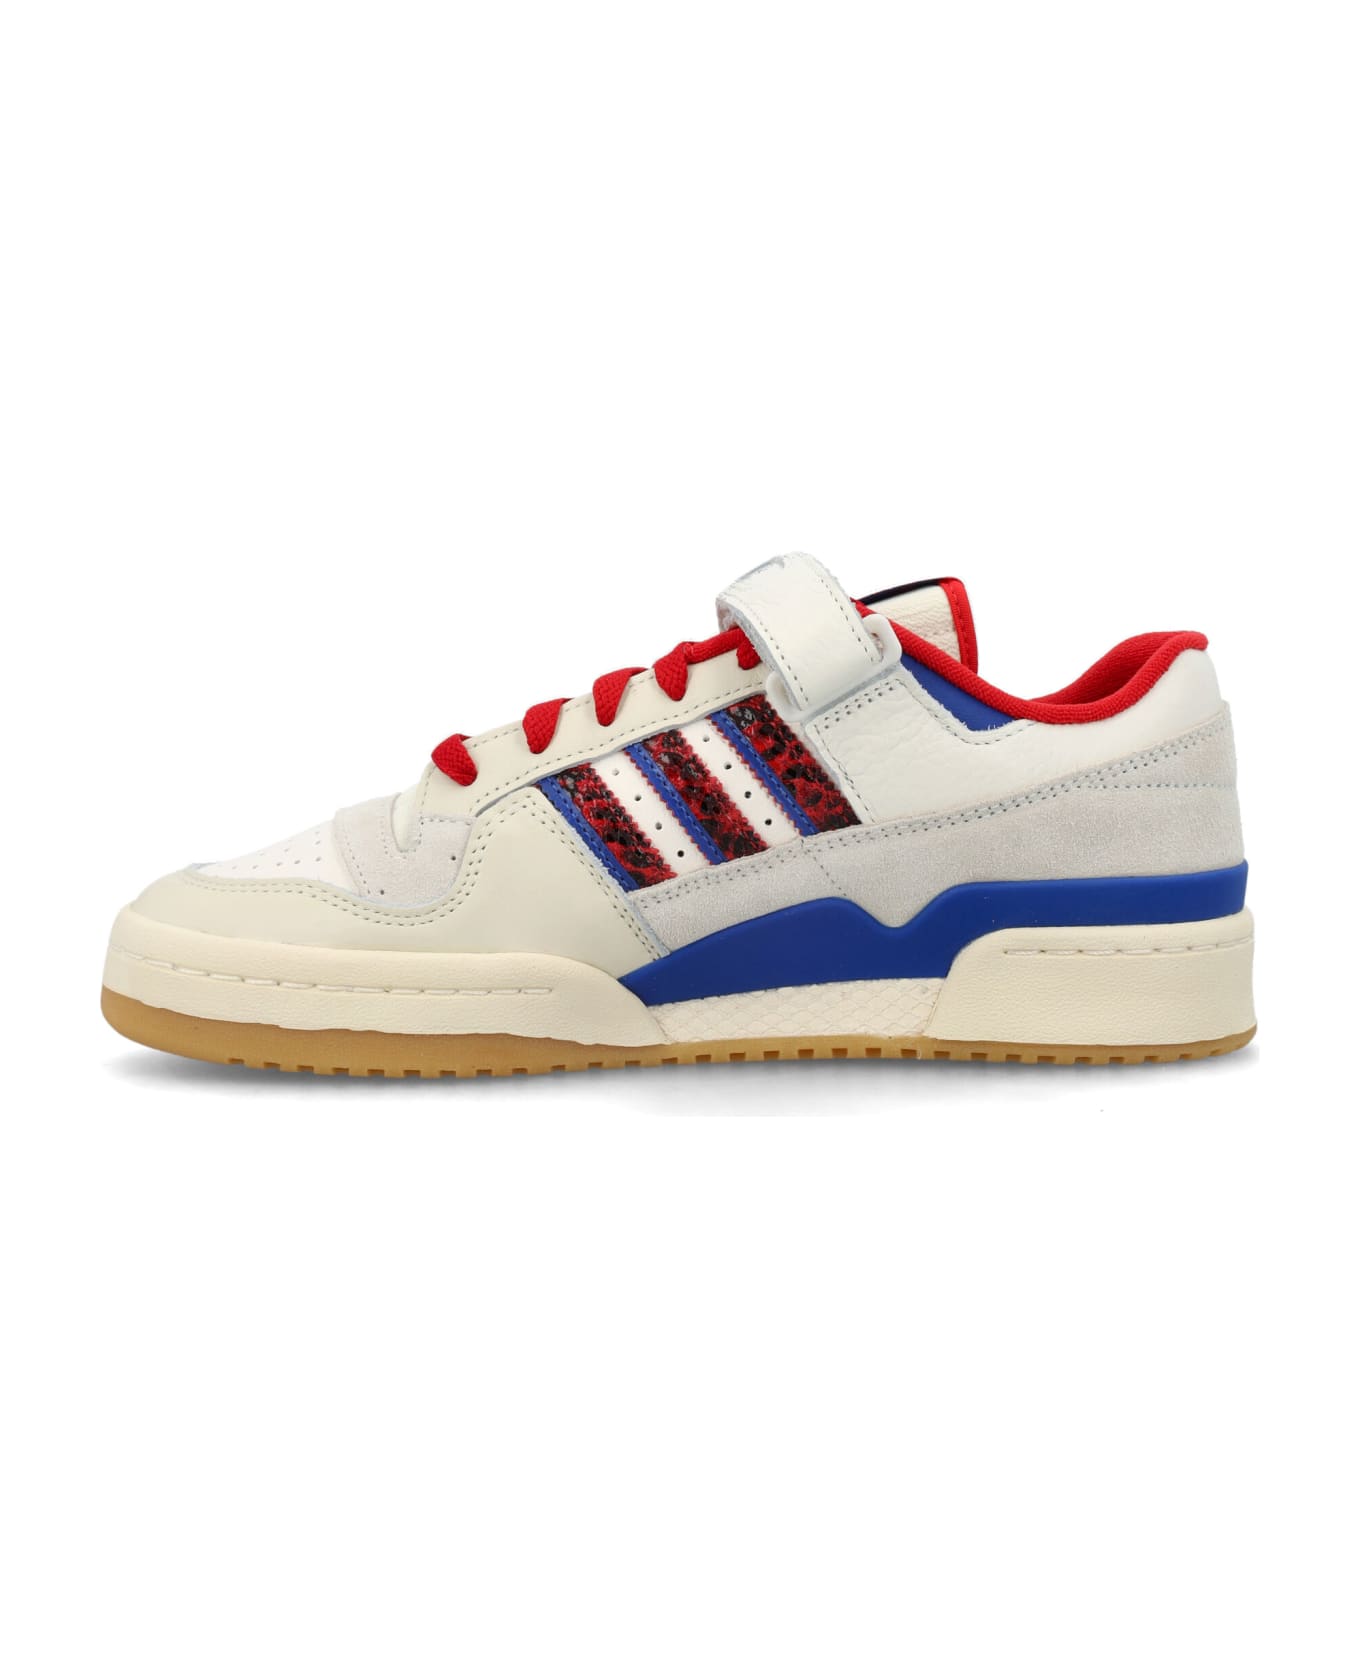 Adidas Originals Forum 84 Low-top Sneakers - WHITE RED